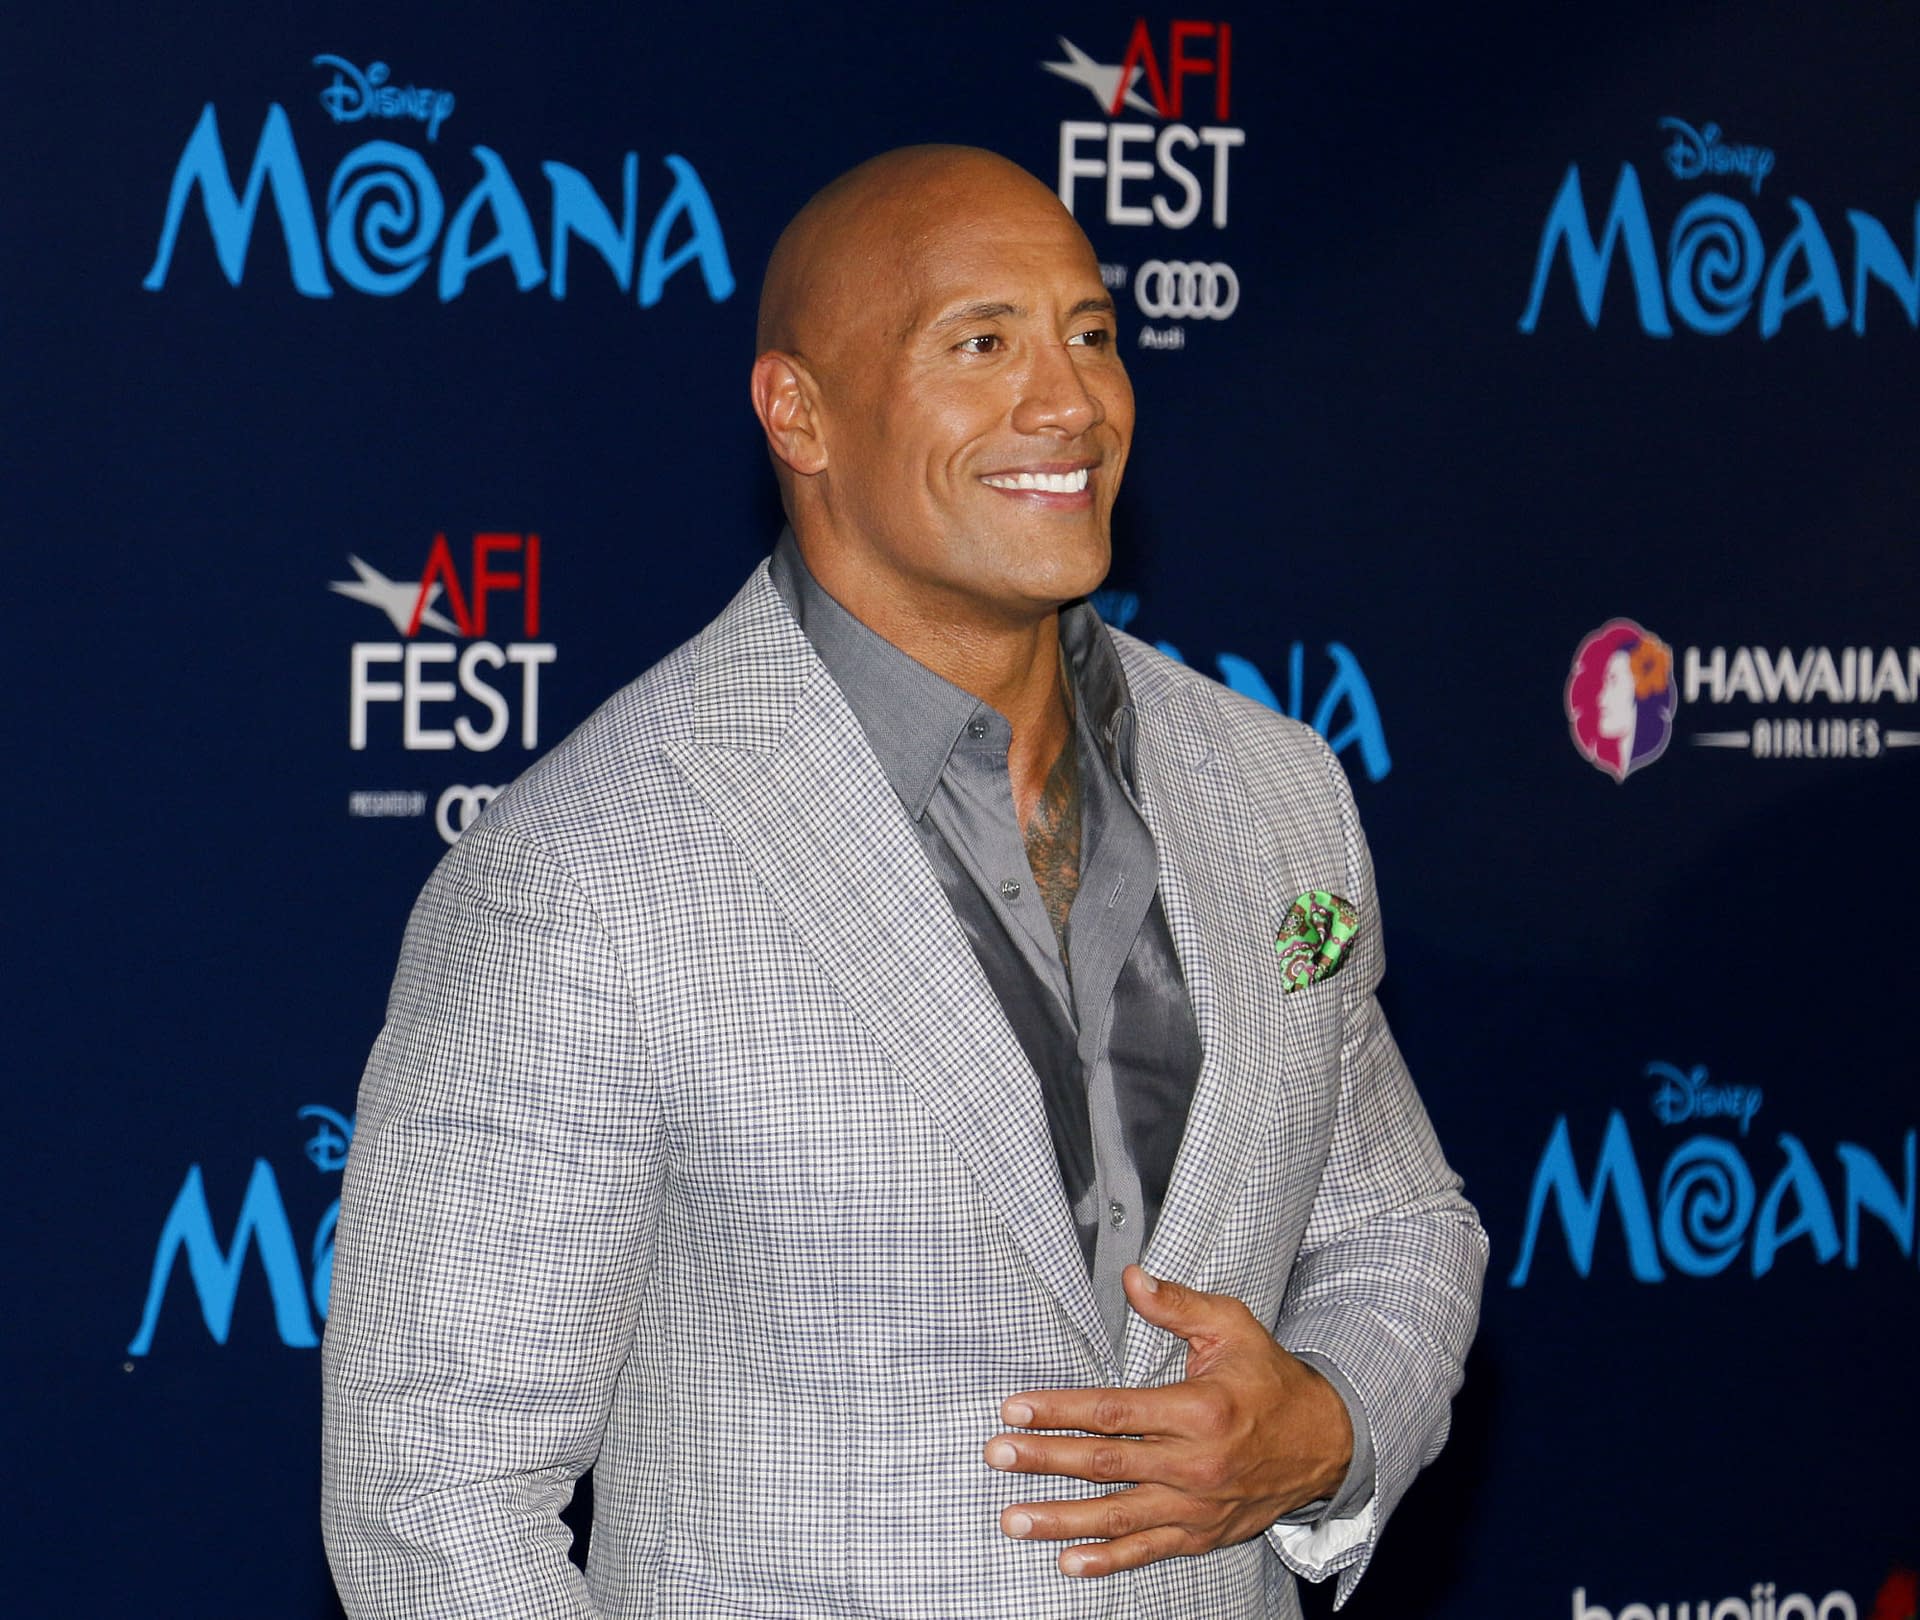 A FALL GUY Movie With Dwayne Johnson Is Coming - AMC Movie News